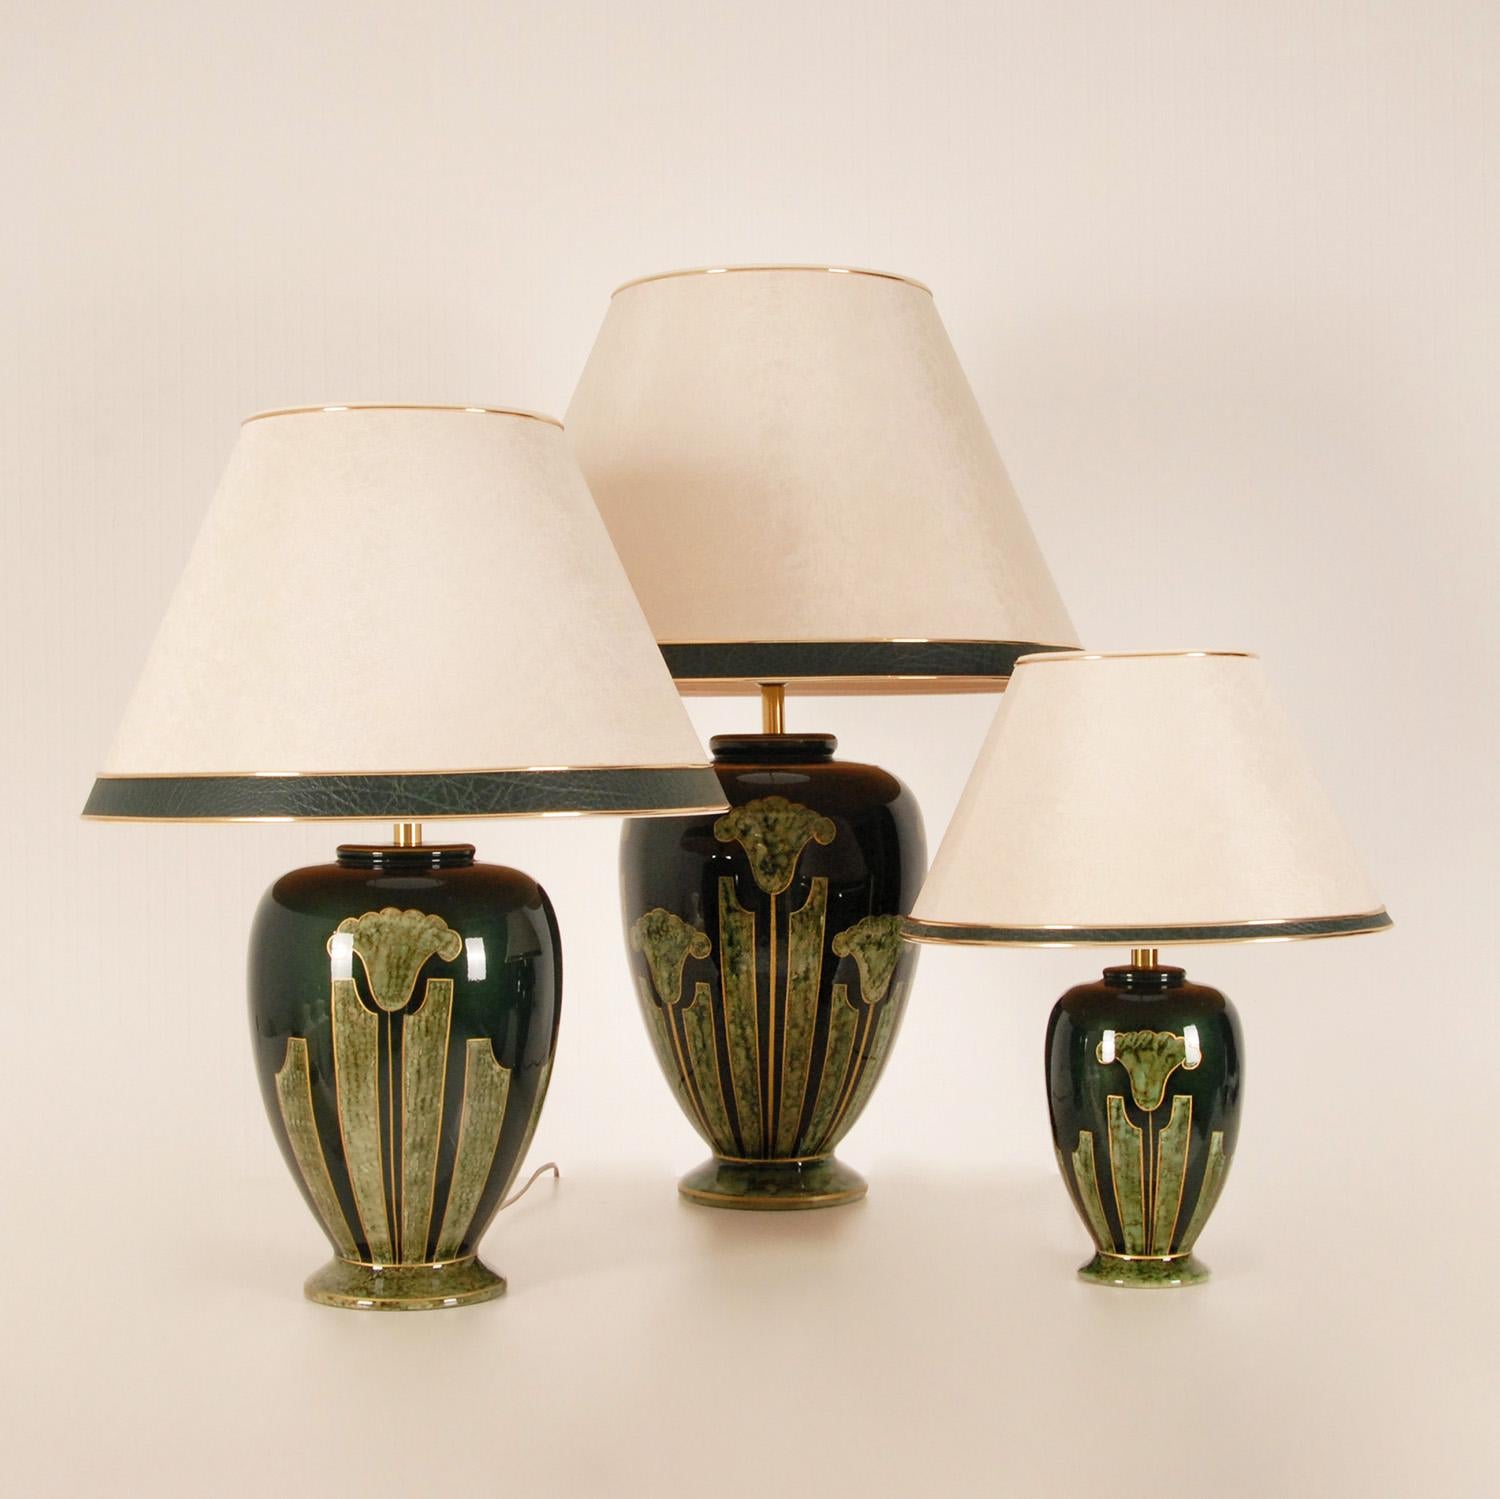 Vintage French Ceramic Green and Gold Table Lamps Marble Metallic, Set of 3 For Sale 6